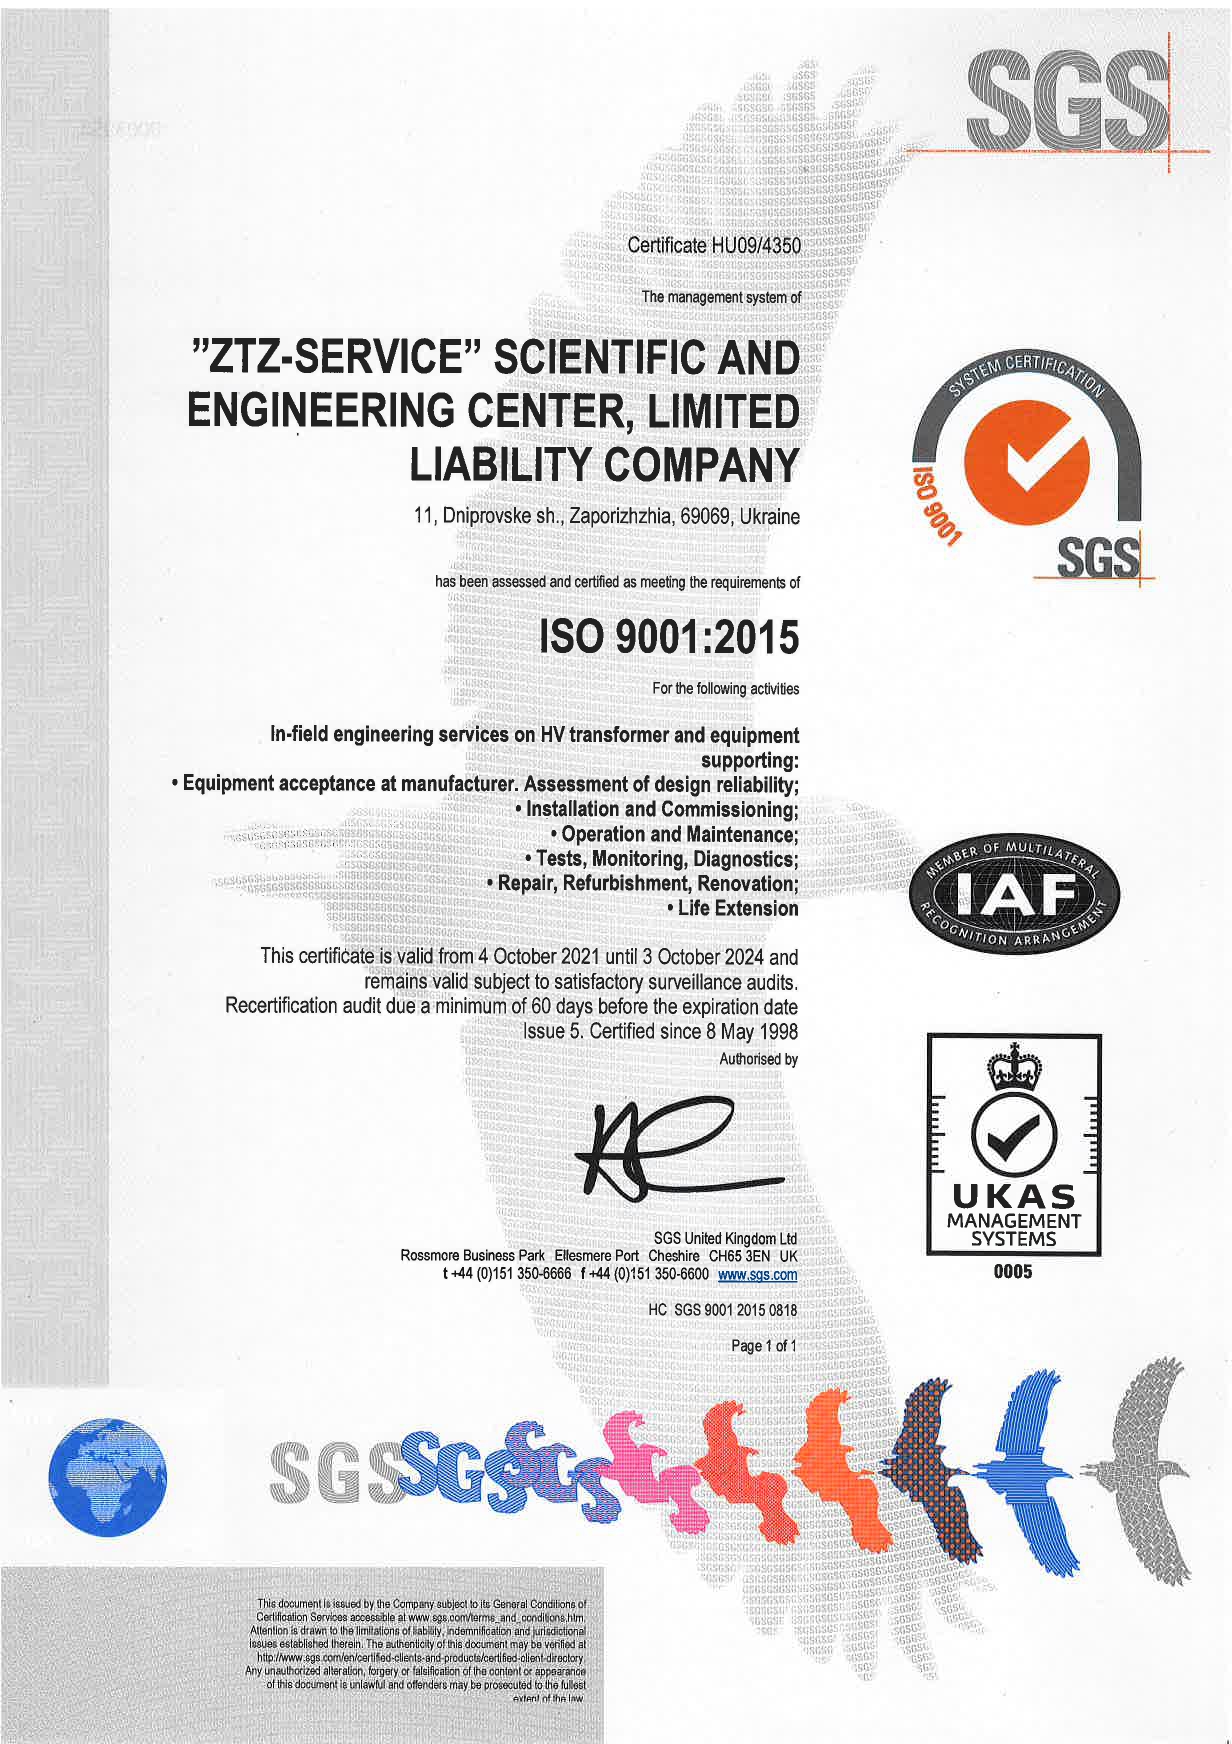 Recertification audit in accordance with International Standards ISO 9001:2015 passed successfully